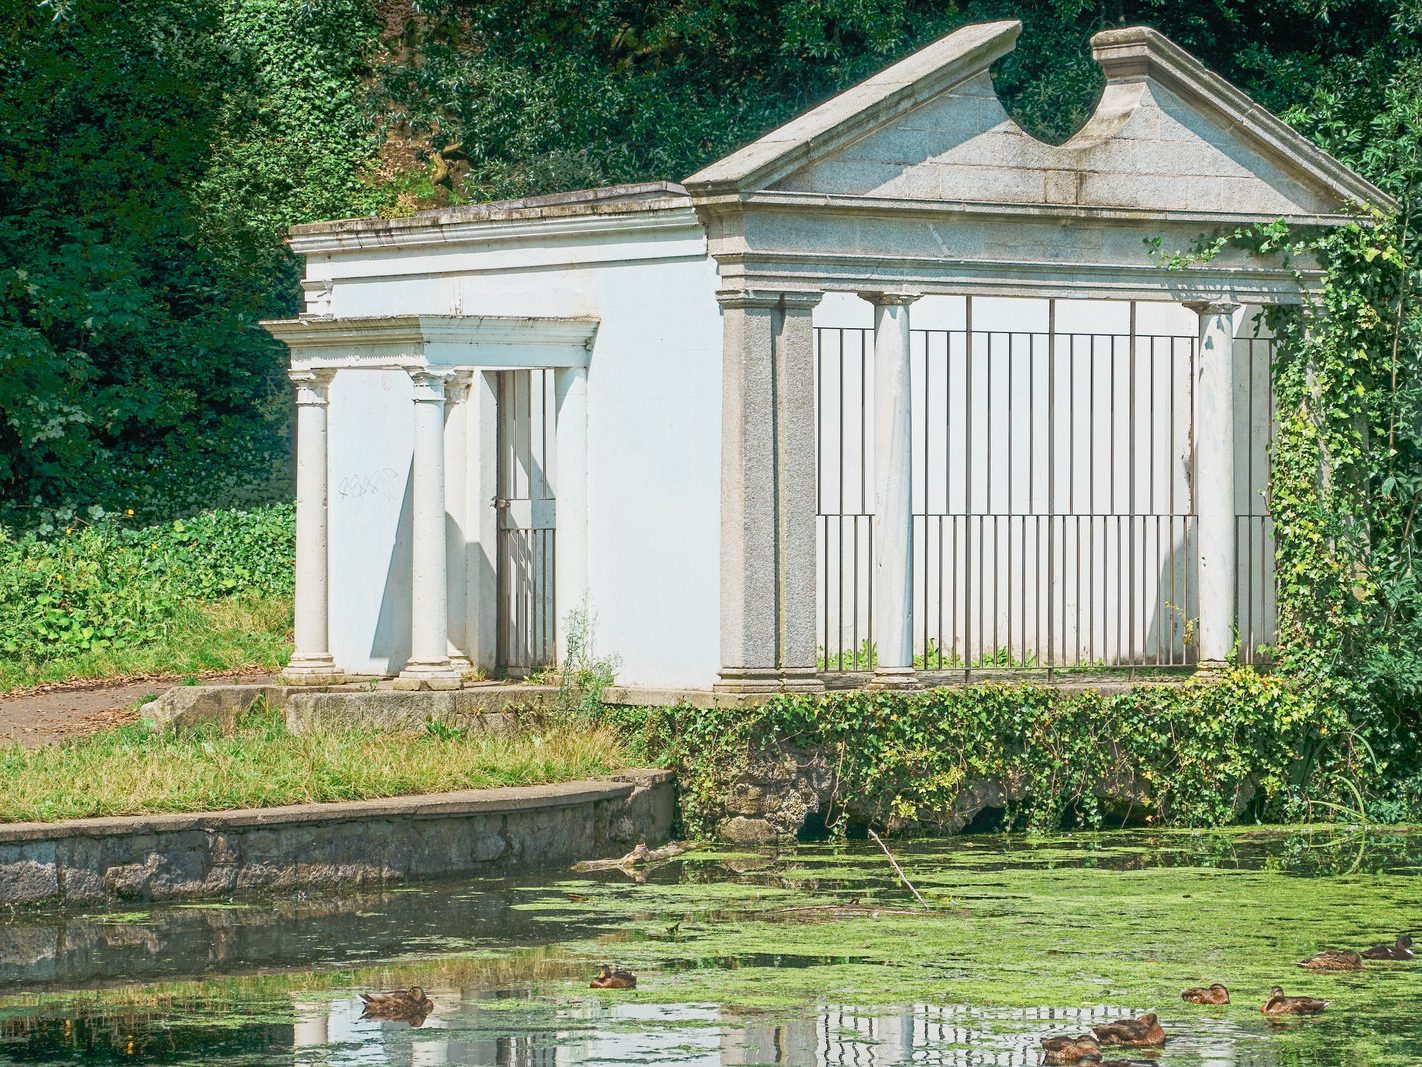 TEMPLE AND POND AT ST ANNE'S PARK IN RAHENY [ALSO KNOWN AS THE BOATHOUSE] 017